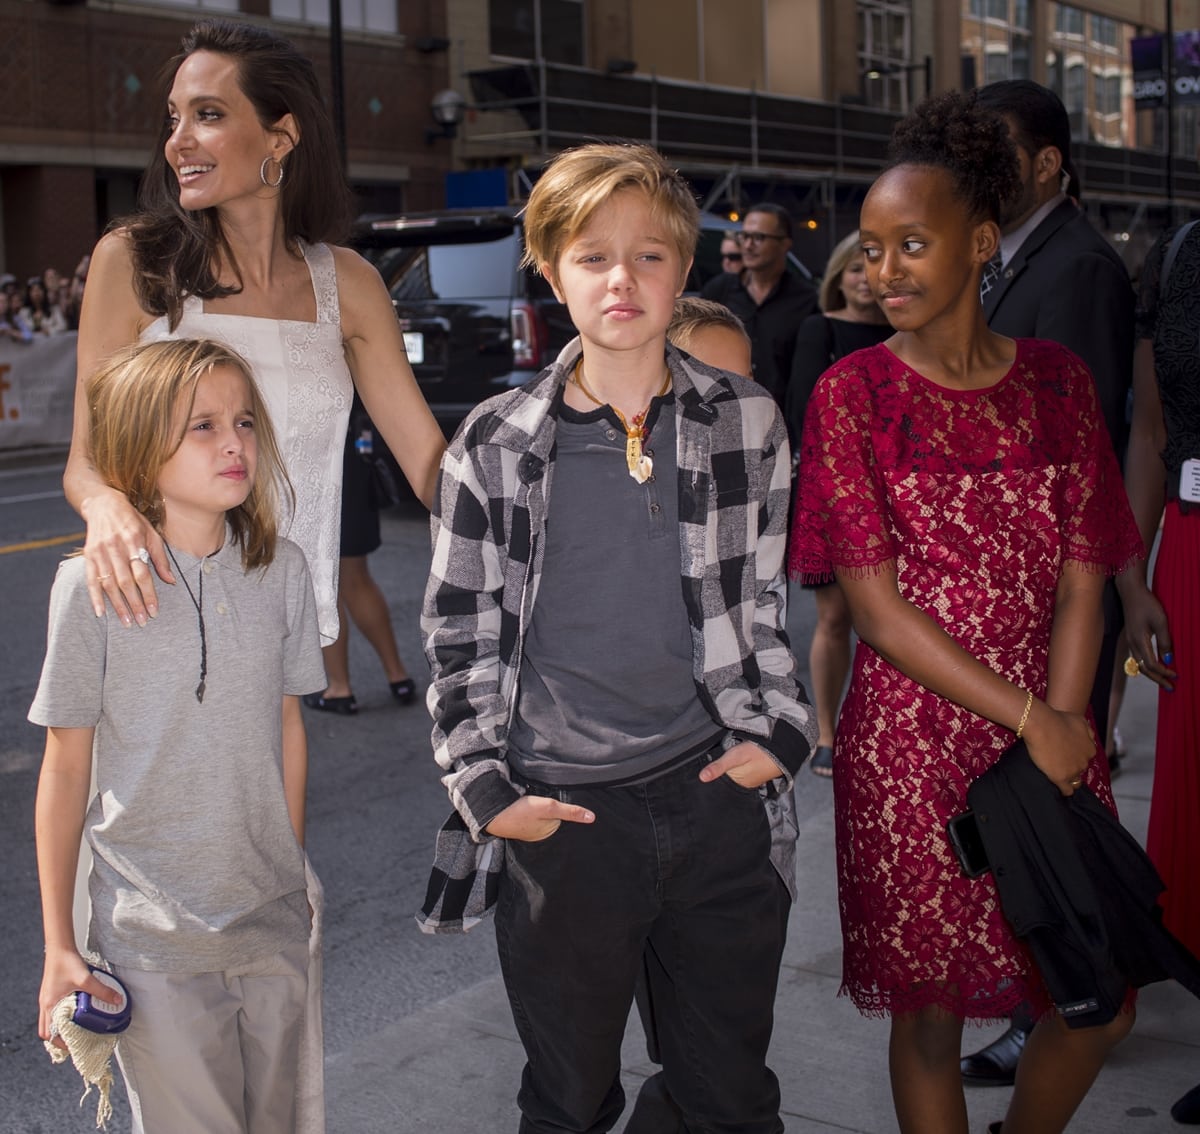 Shiloh Jolie-Pitt dresses like a boy with his mother Angelina Jolie and his siblings Pax and Zahara